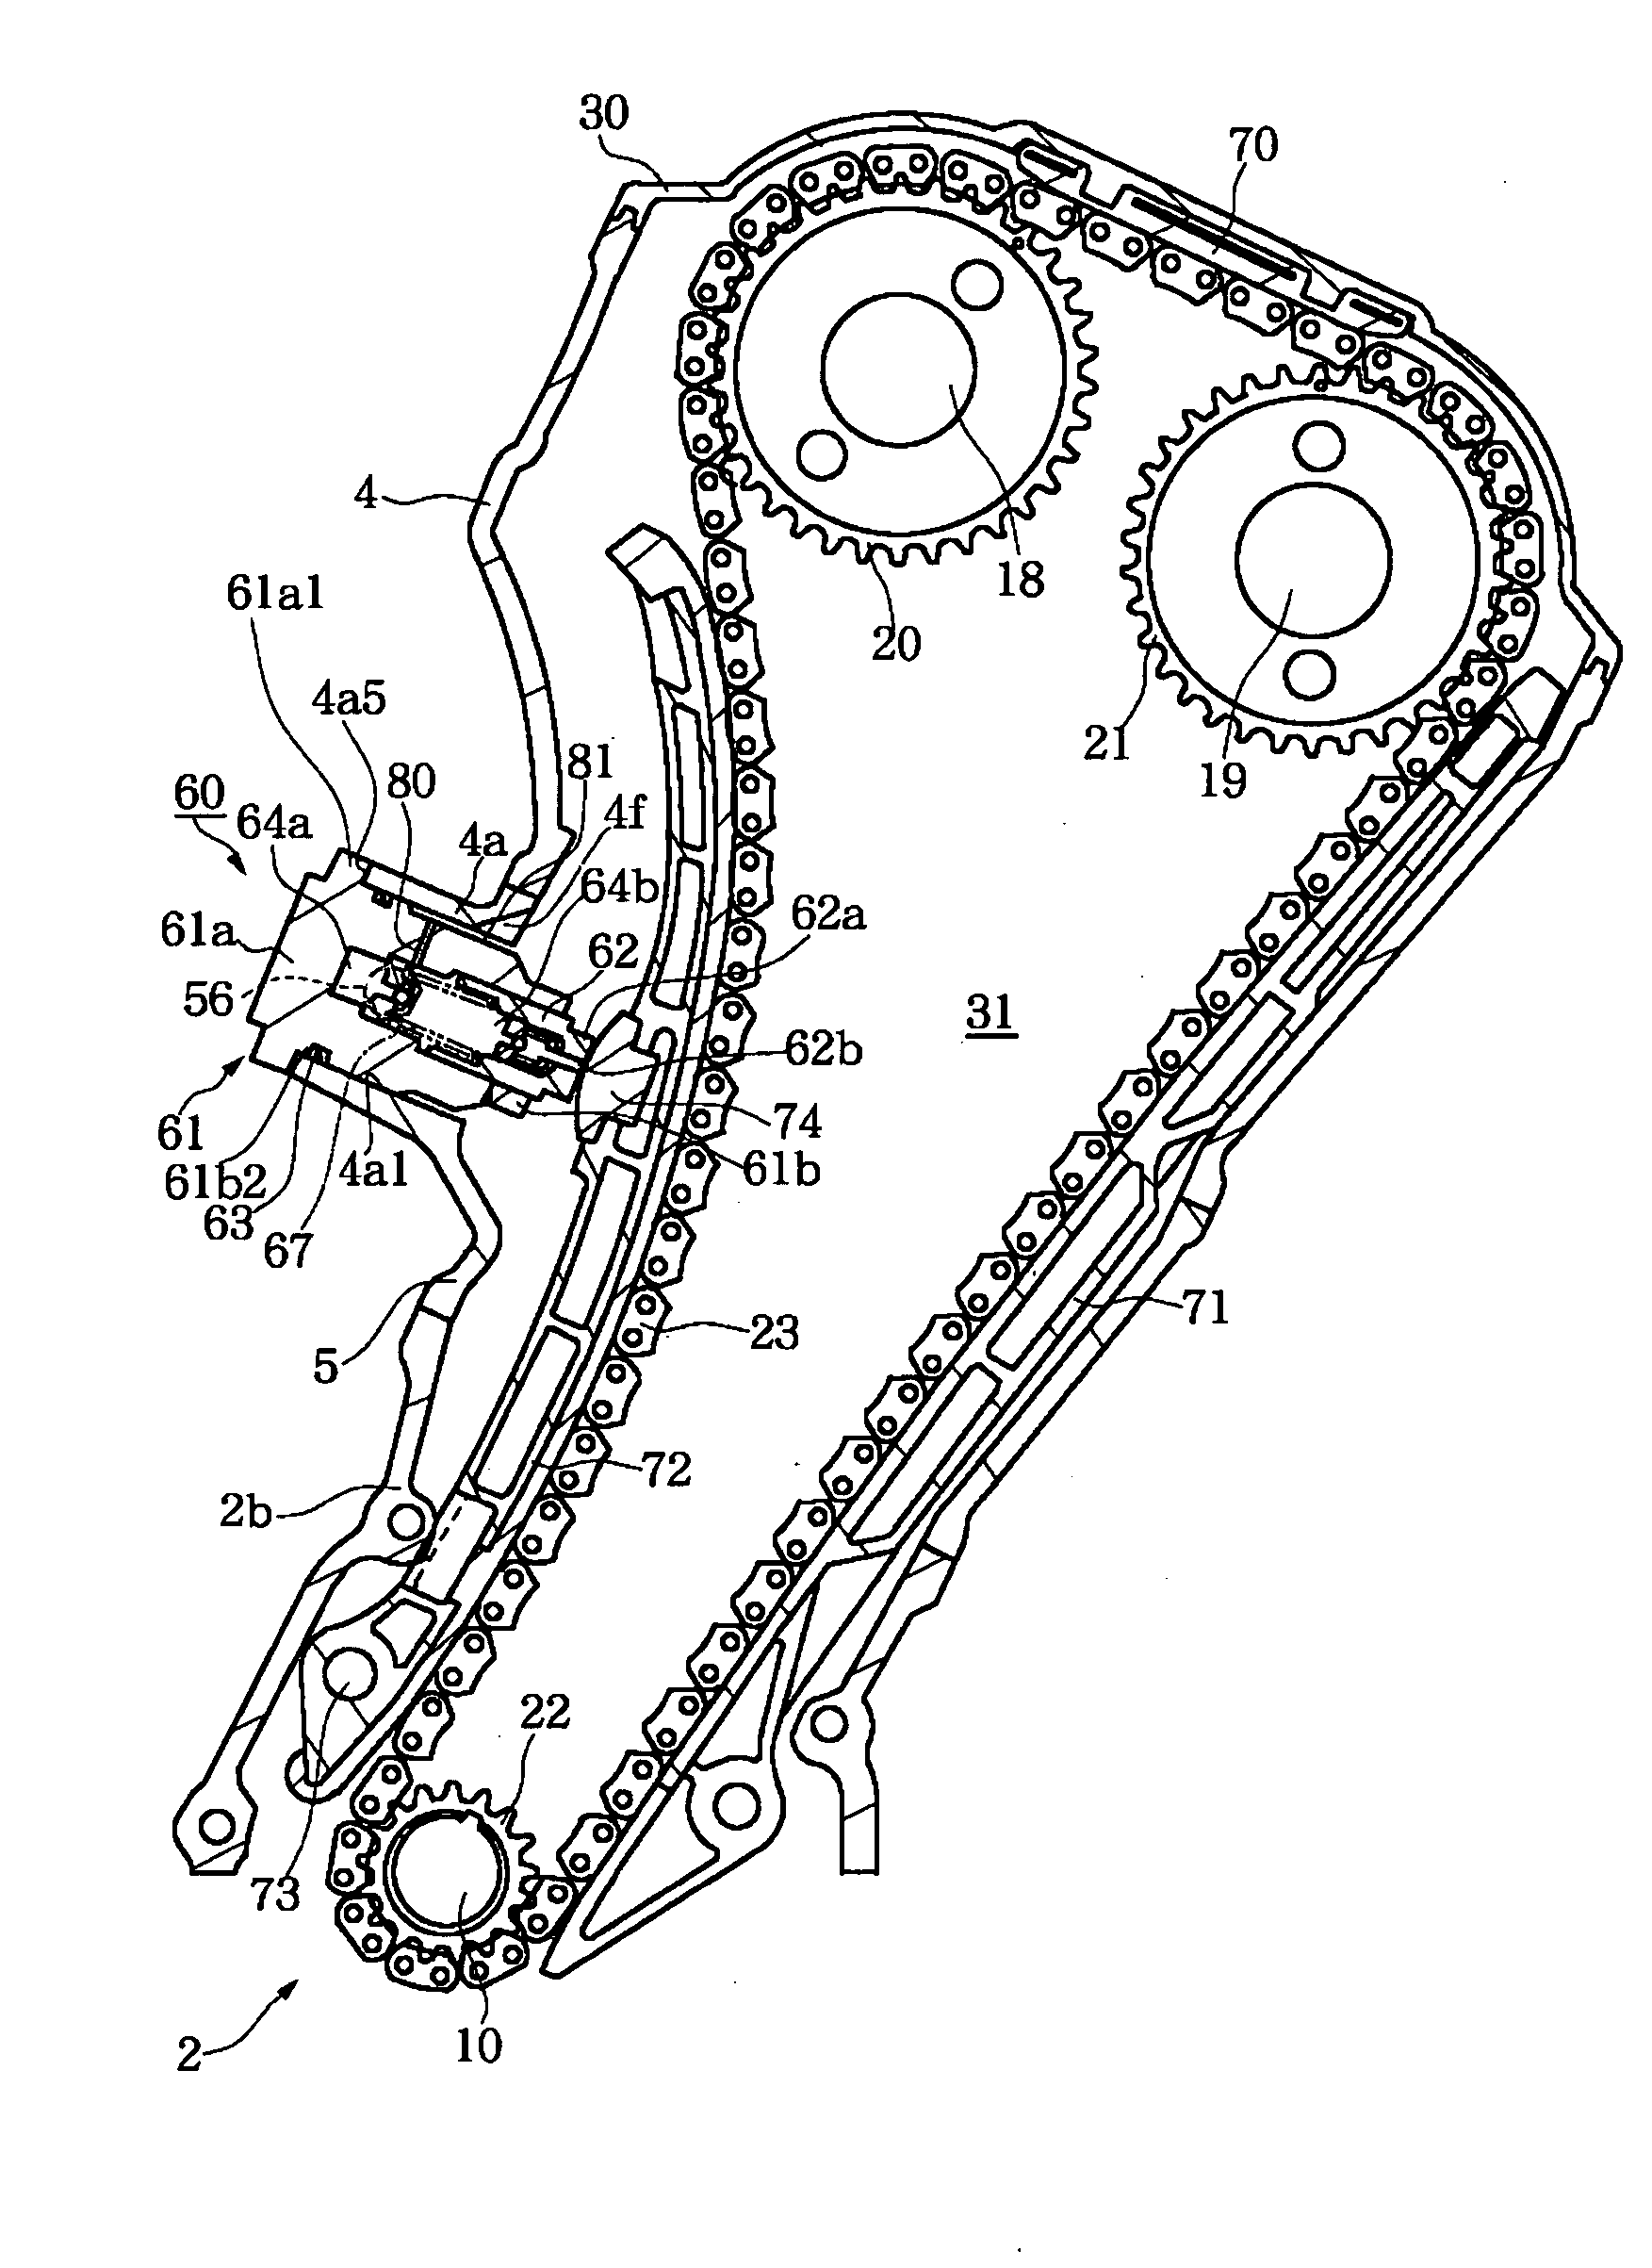 Engine for a vehicle